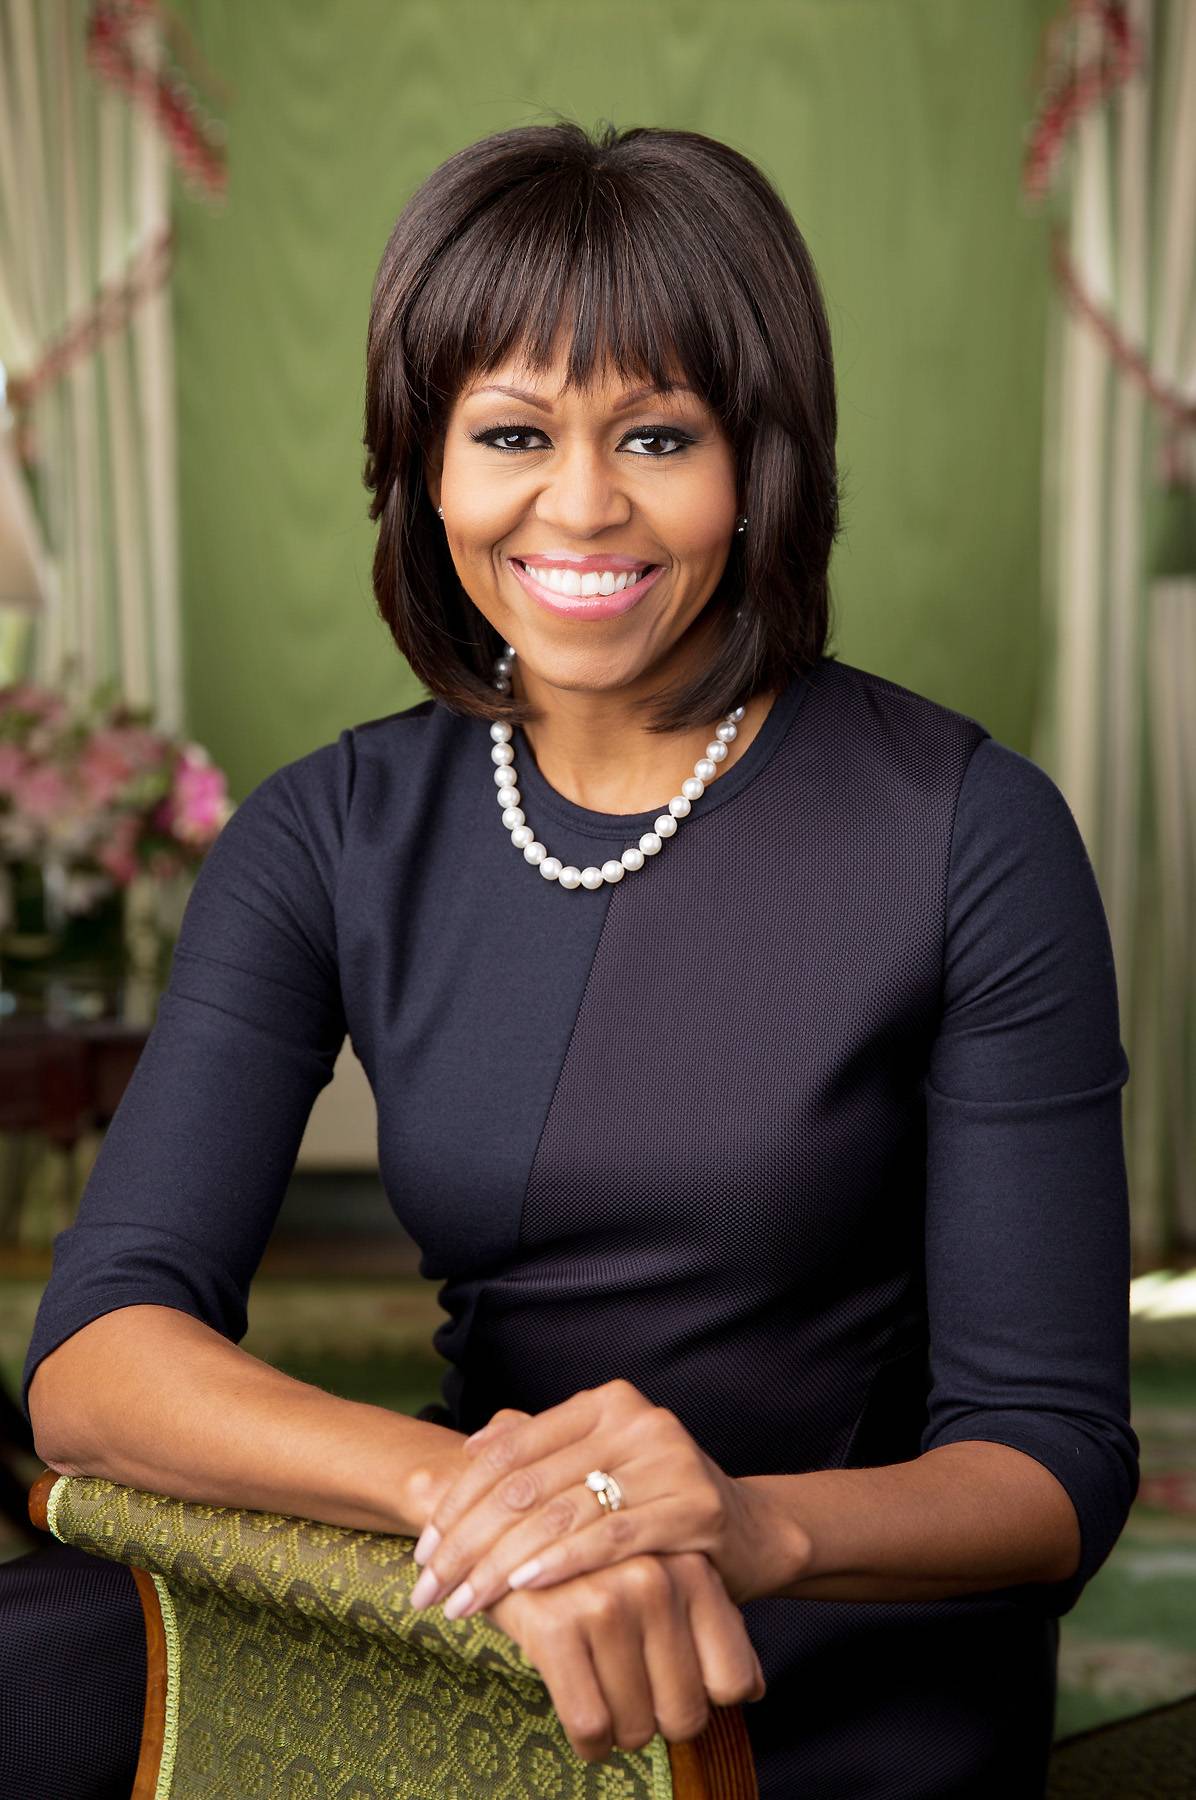 Michelle Obama - November 19, 2013 - The First Lady stopped by to kick it with us on 106 and talk about the importance of education. Yeah we can't believe she stopped by either!Watch a clip now!